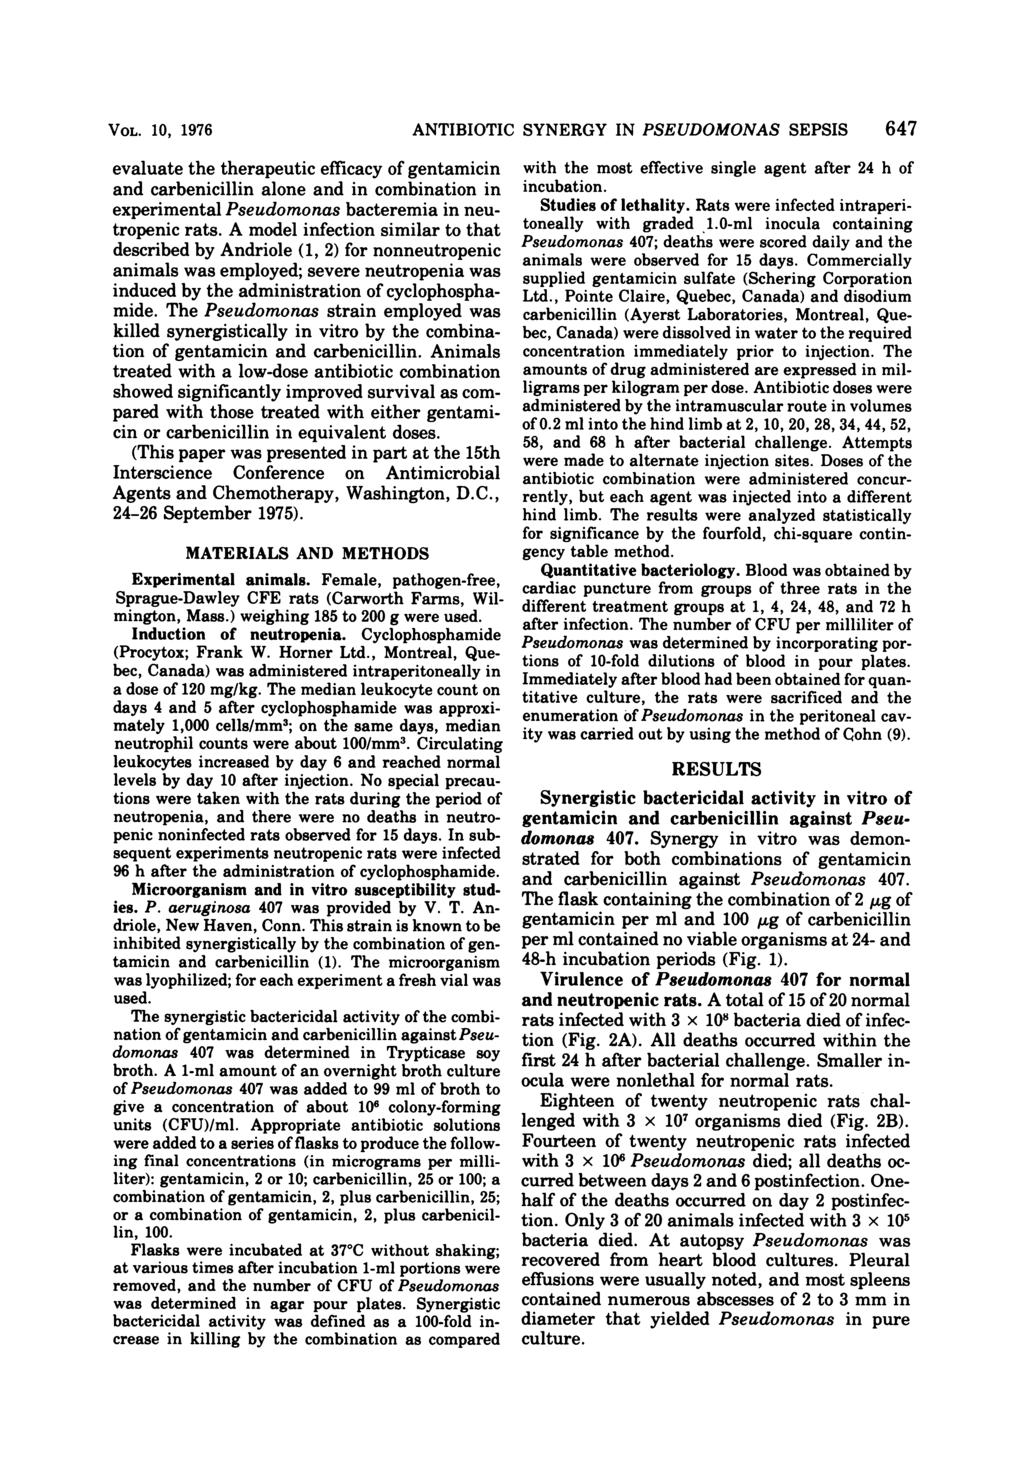 VOL. 10, 1976 evaluate the therapeutic efficacy of gentamicin and carbenicillin alone and in combination in experimental Pseudomonas bacteremia in neutropenic rats.